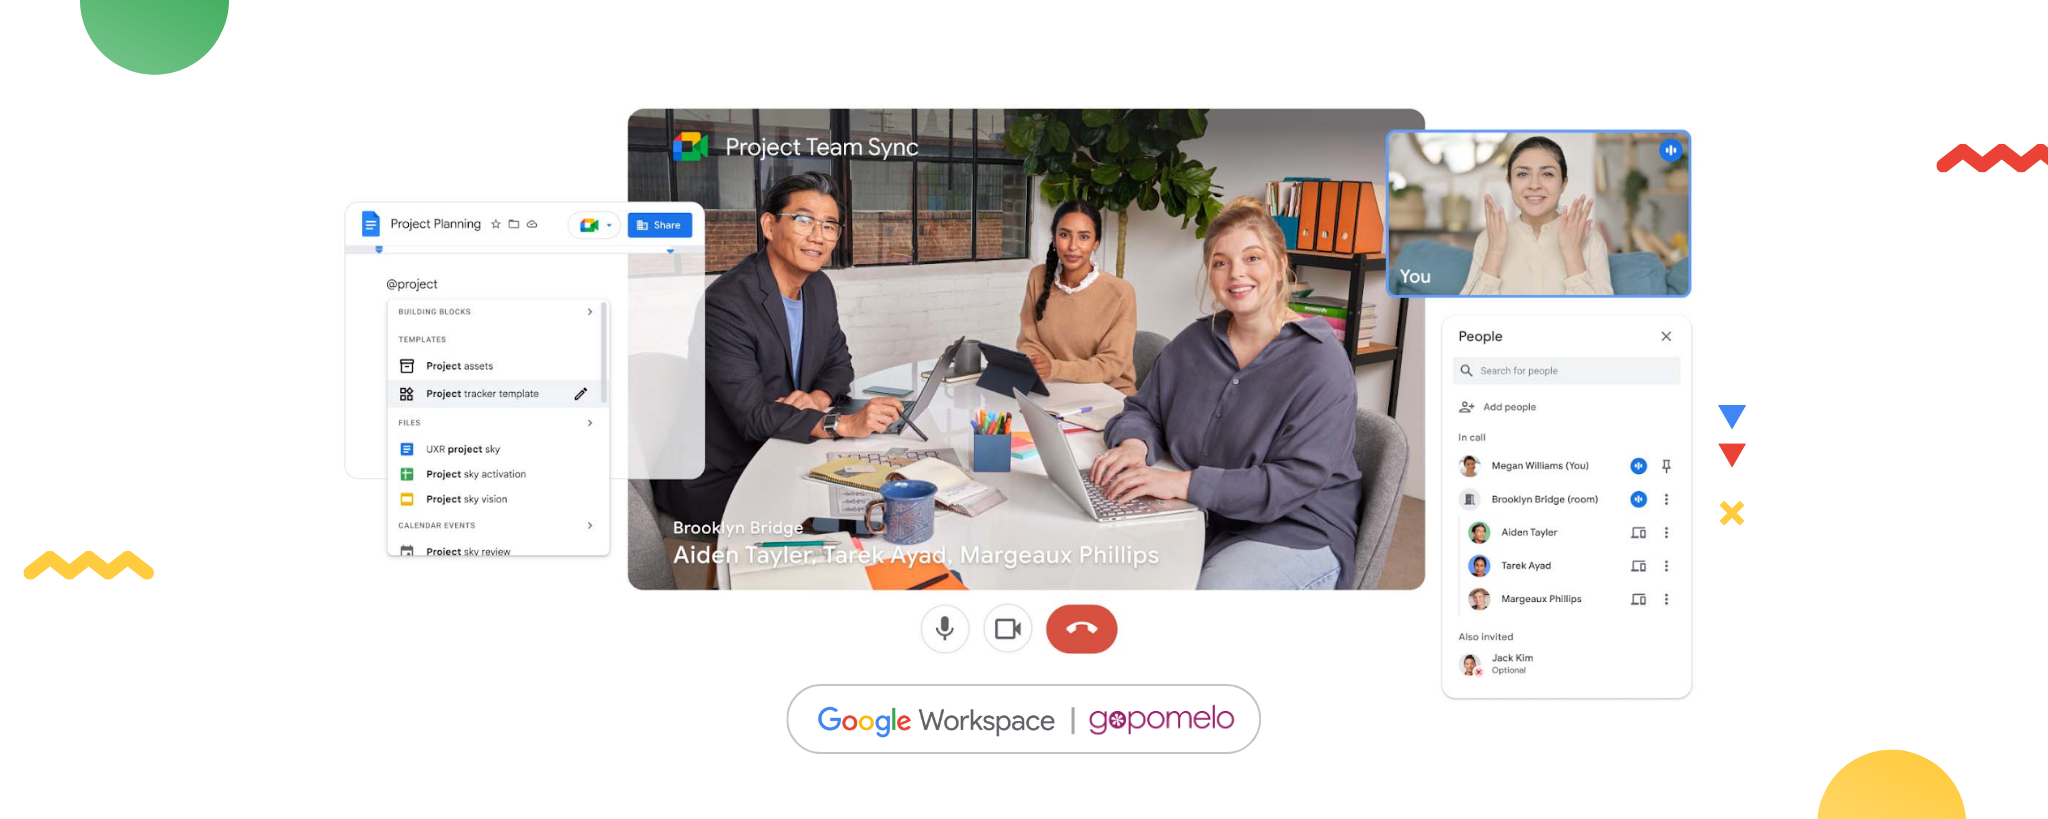 Extending the Power of Google Workspace for Hybrid Workers | GoPomelo